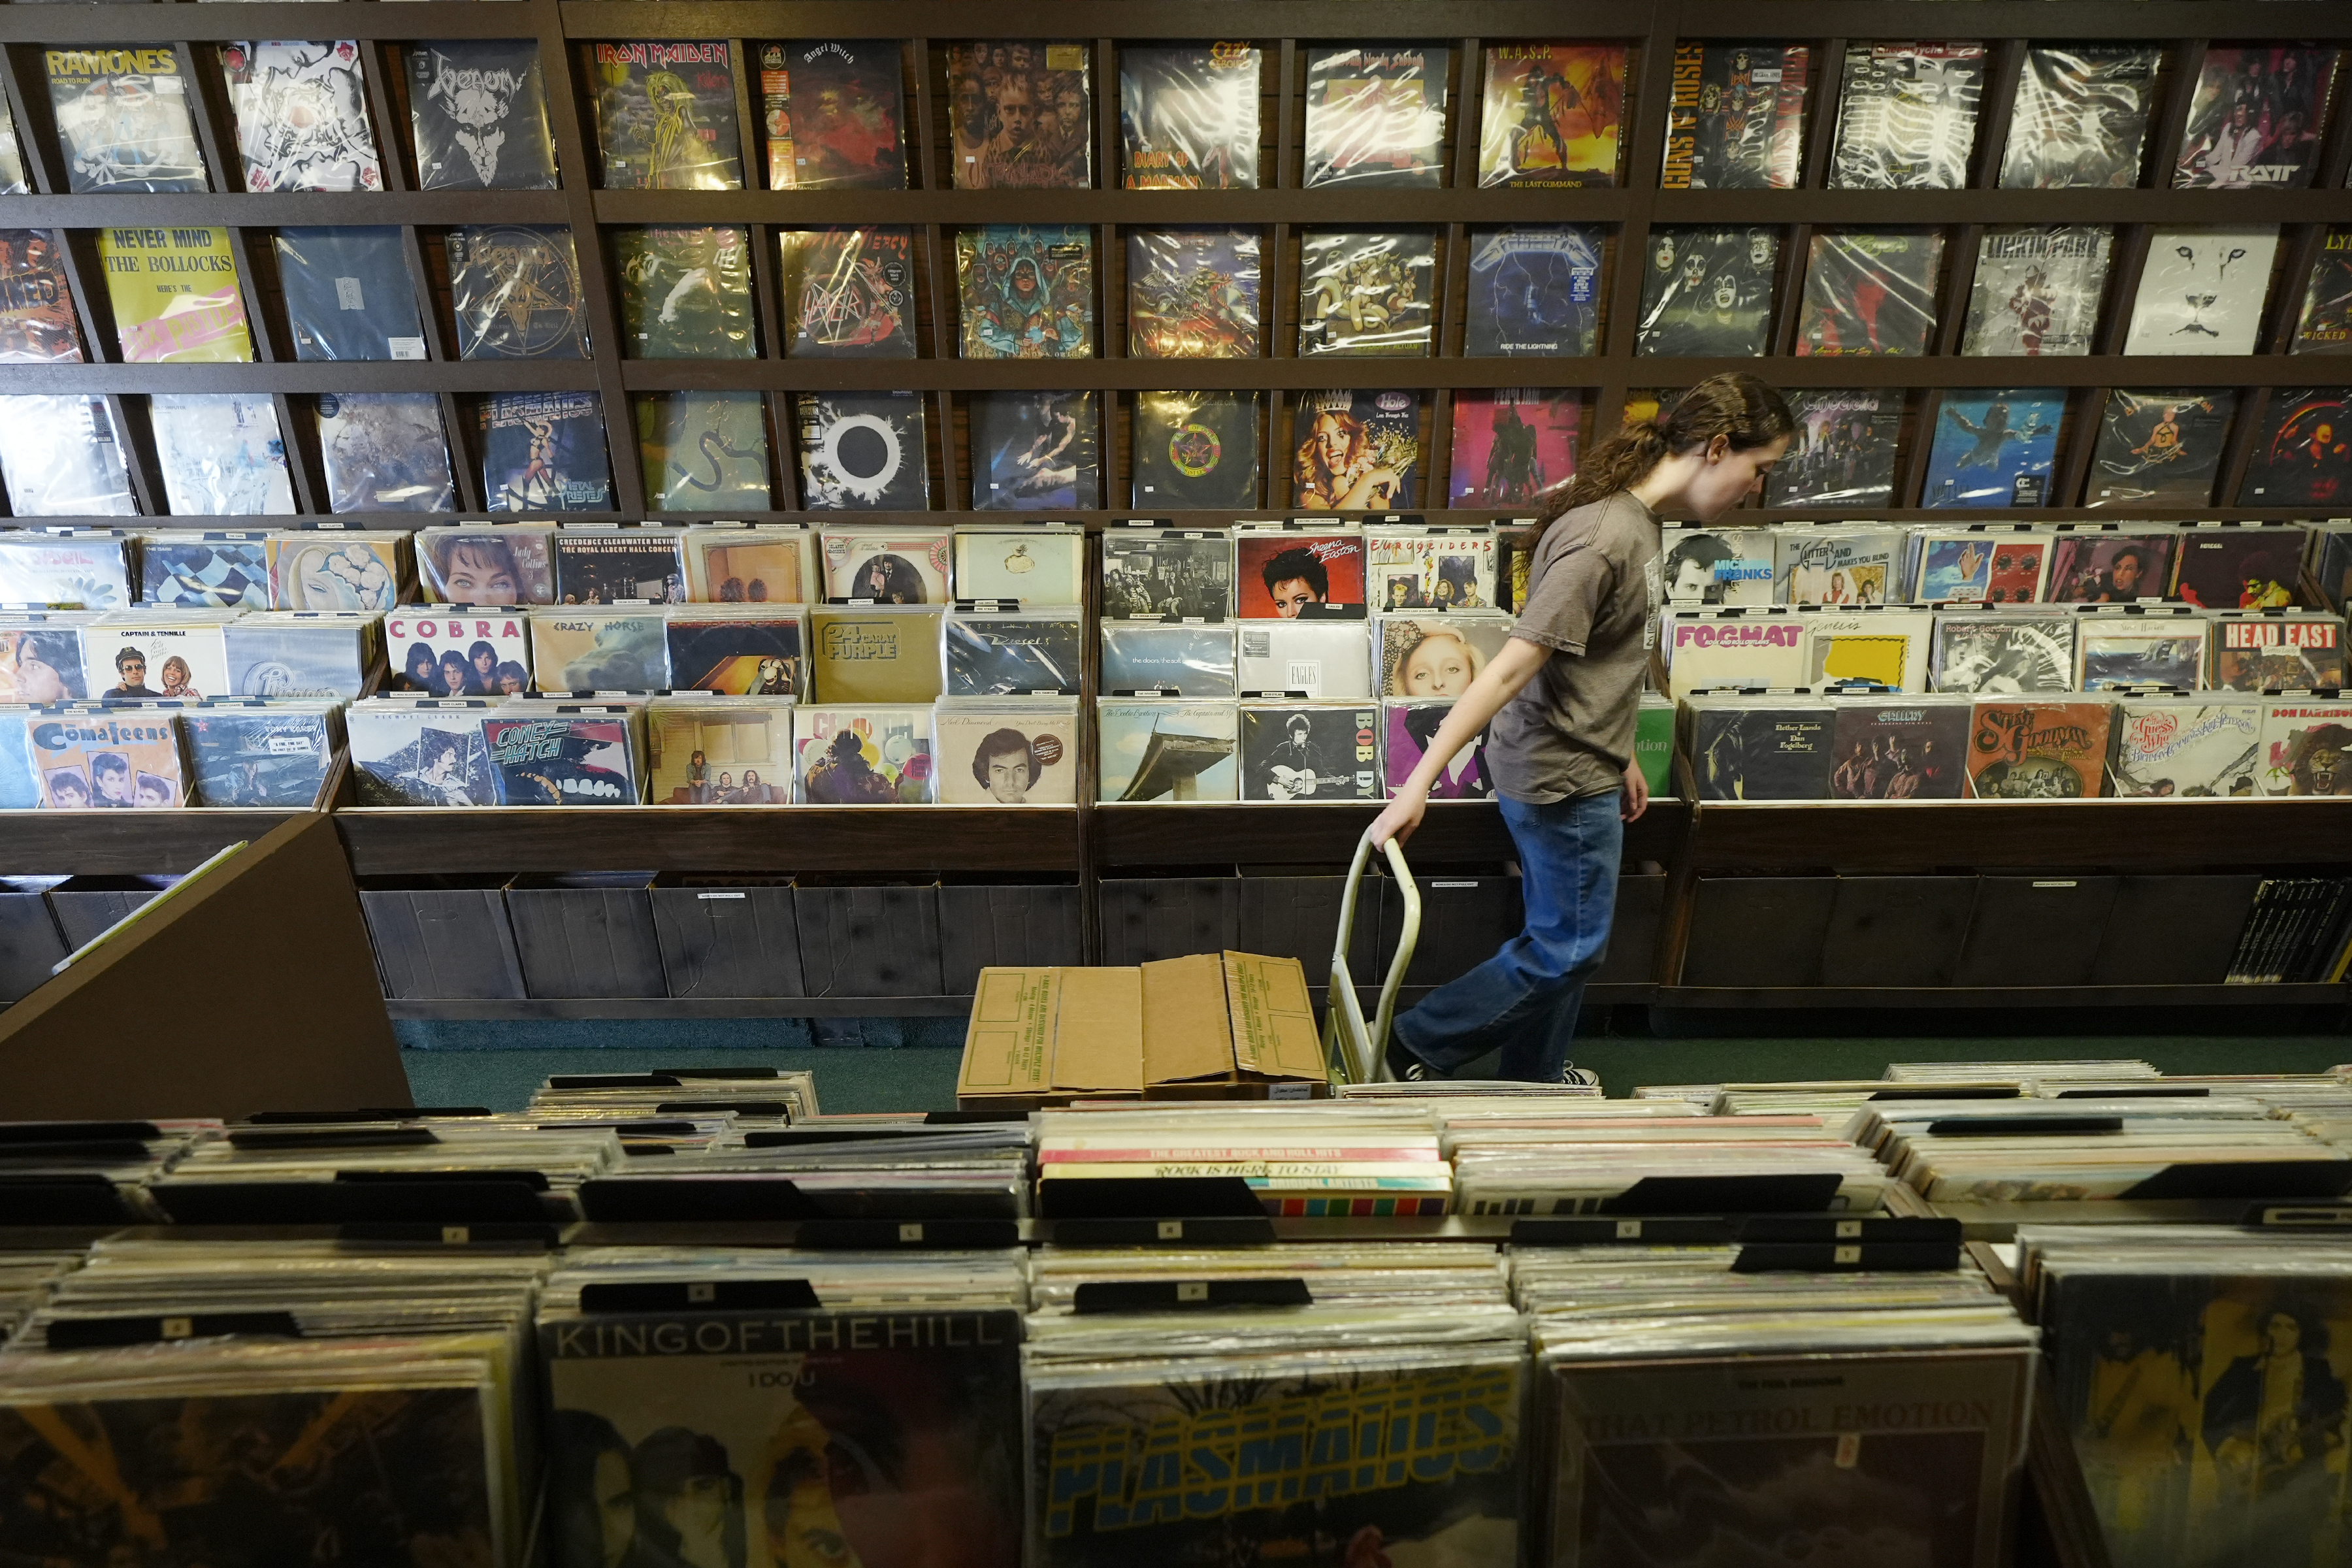 record store day celebrates indie retail music sellers as they ride vinyl's popularity wave